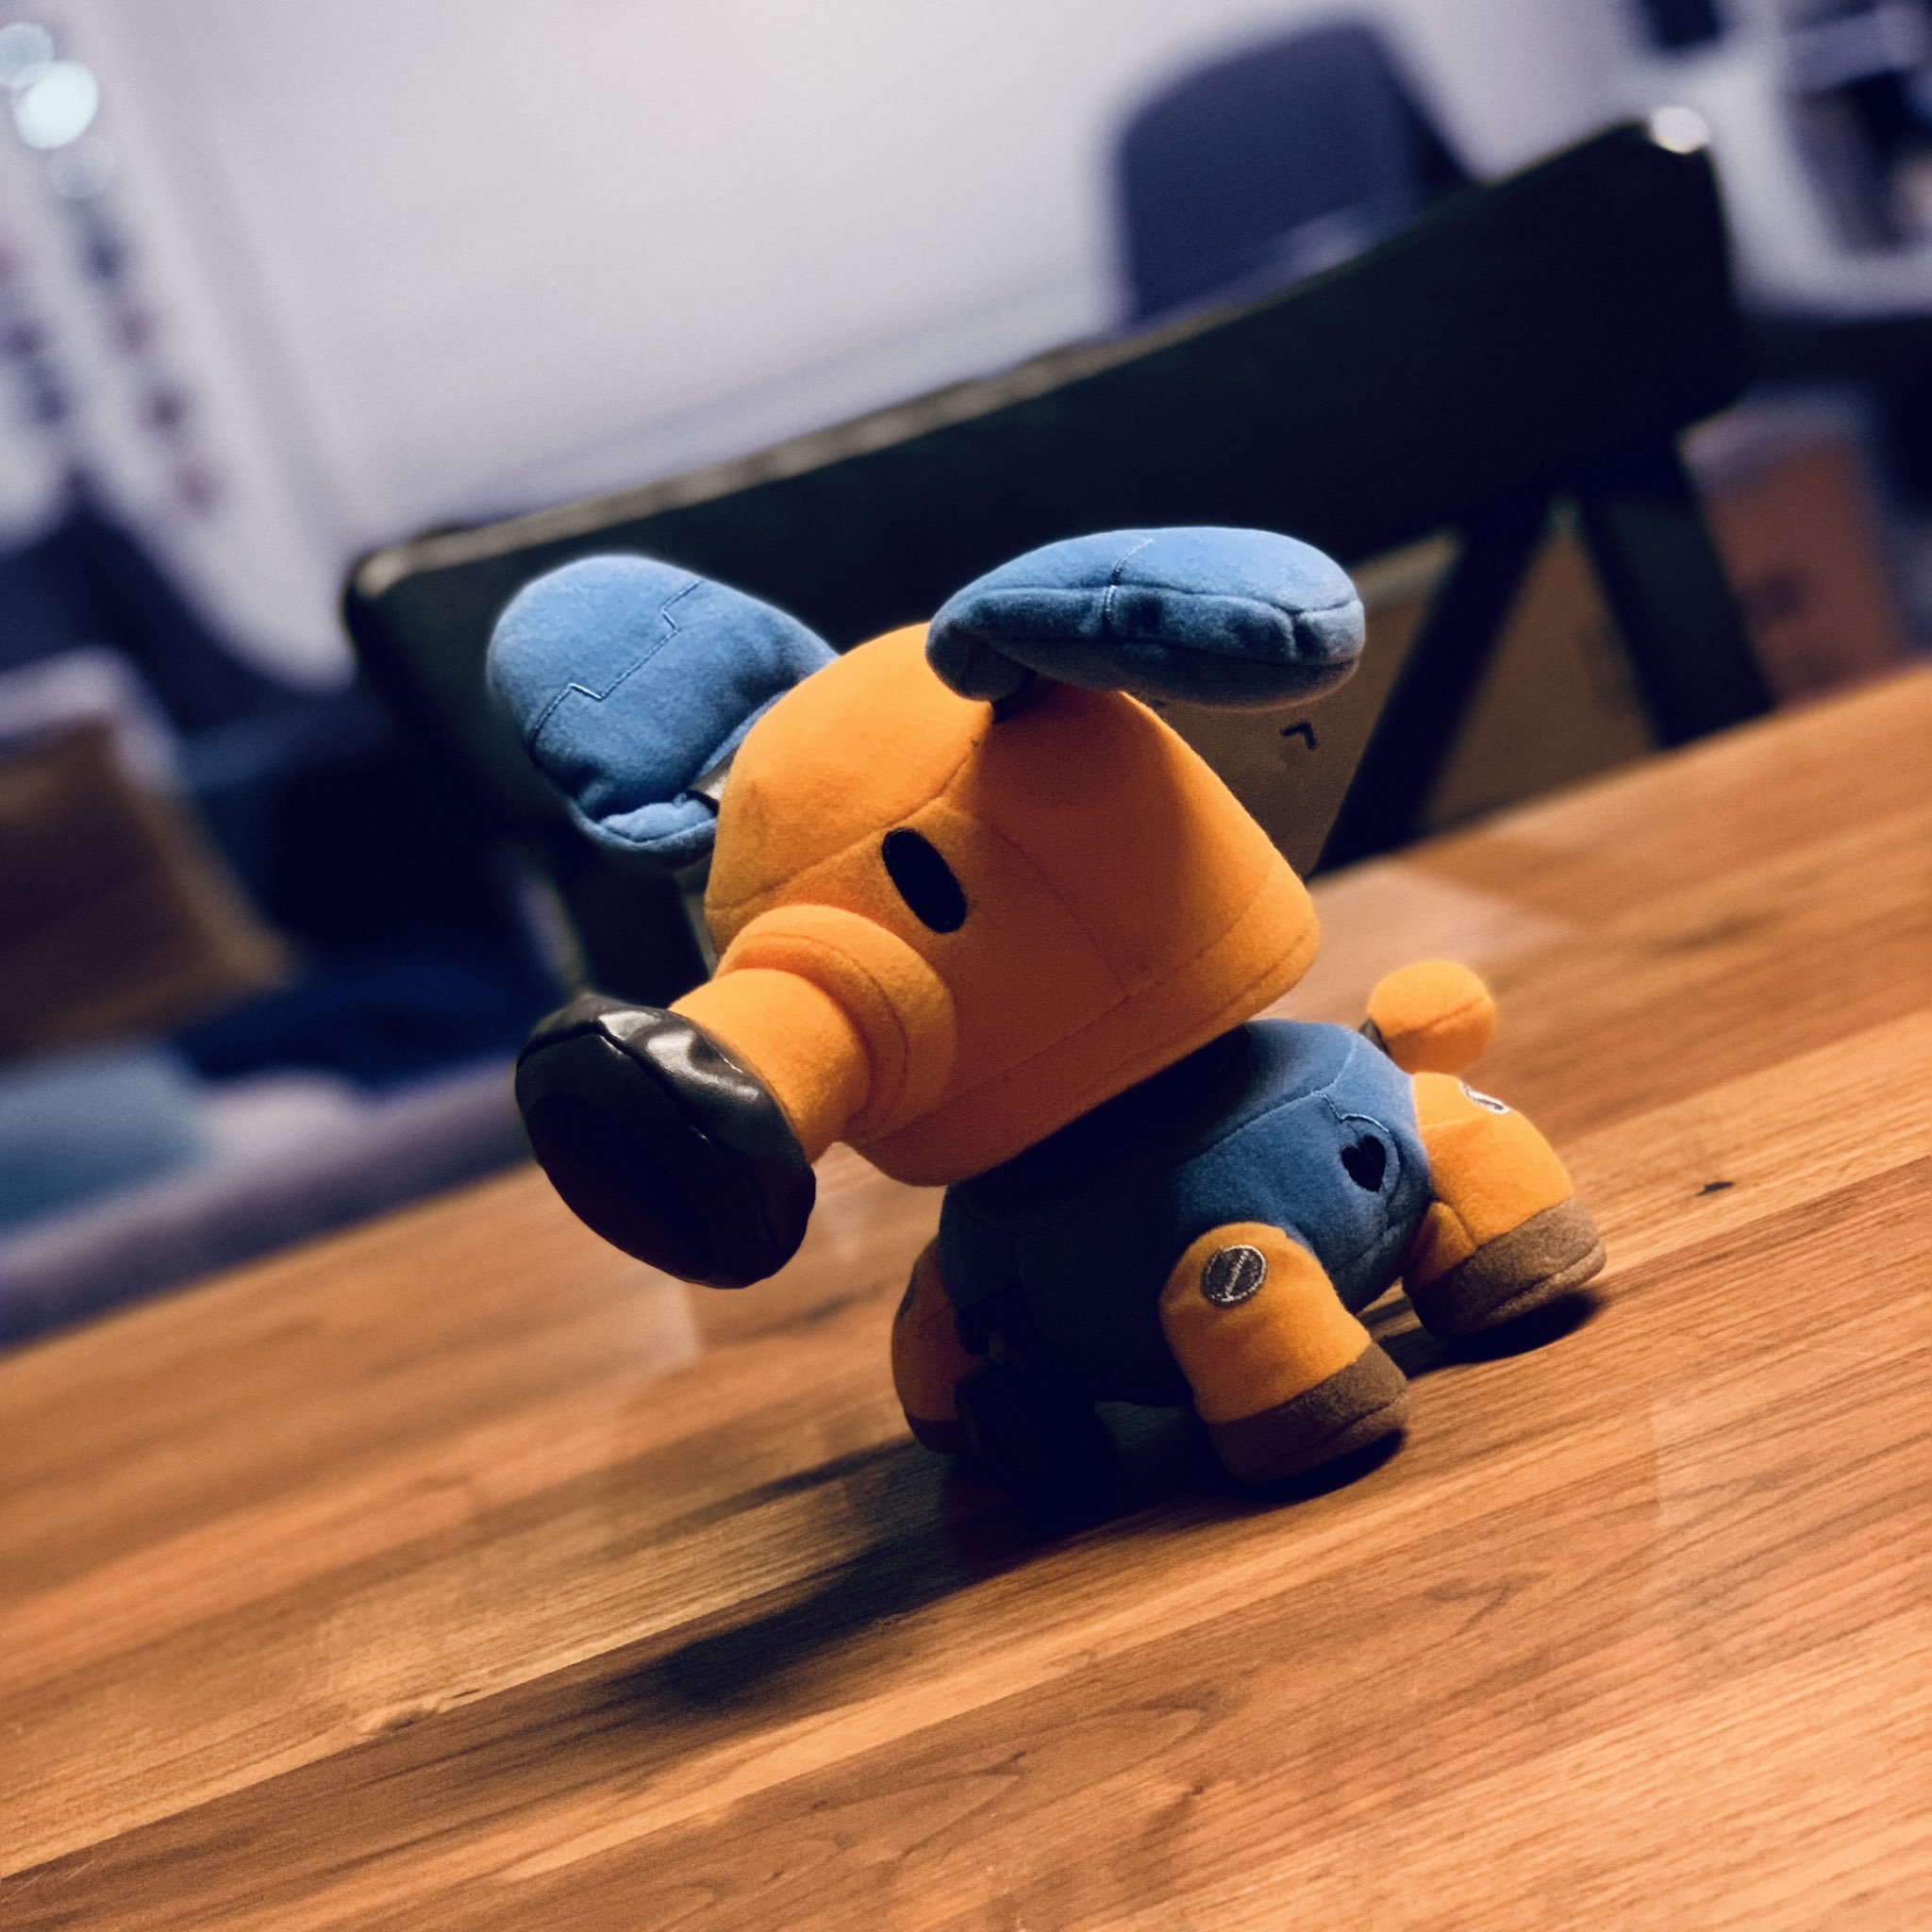 Frank Fs7n On Twitter This Cute Little Guy And His Owner Arrived In The Office Today Next Spike Brawlstars Plushies Dogo Jessie Merchandise Https T Co 1mt1szzzhh - peluche brawl stars frank